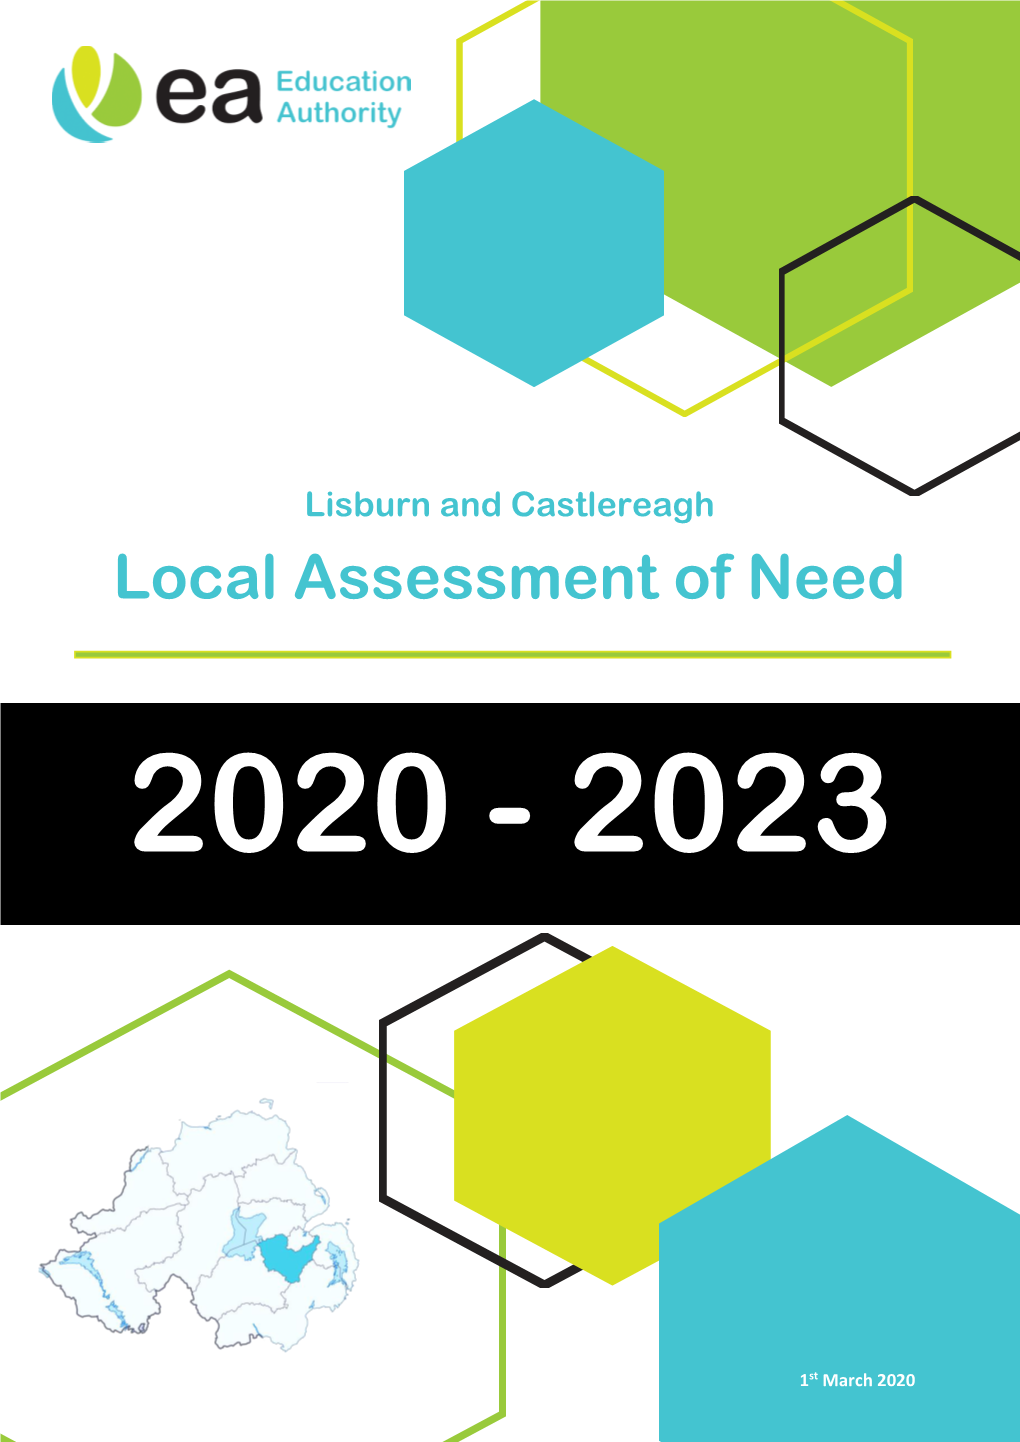 Lisburn and Castlereagh Local Assessment of Need 2020 - 2023